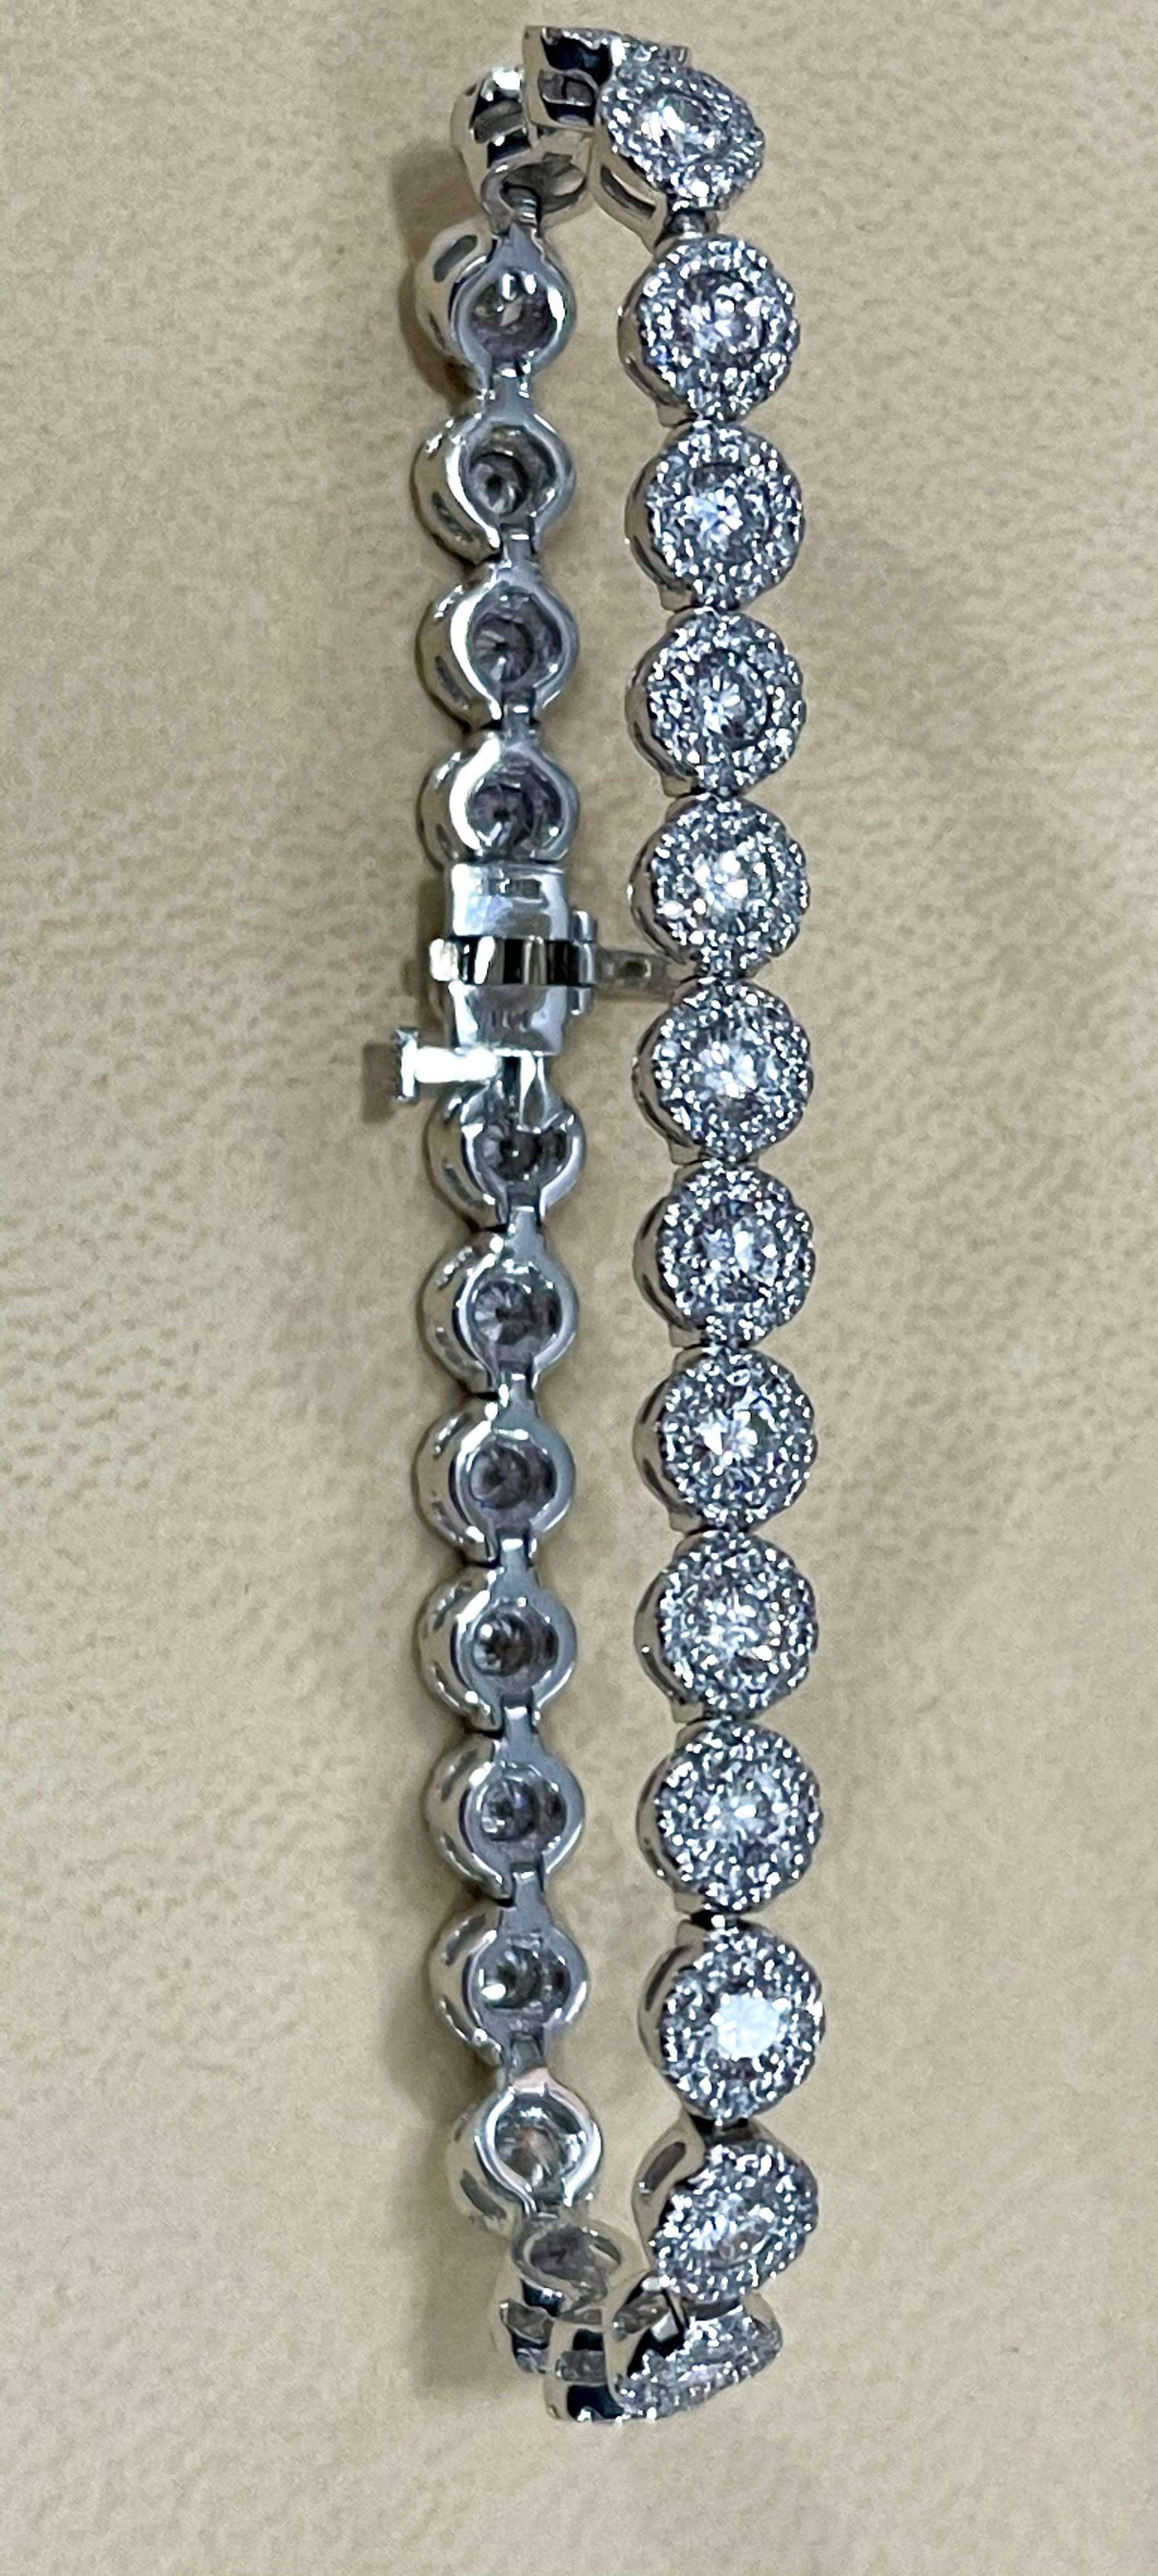 
Effy's 5.5 Ct  Basel set Diamond Line Tennis Bracelet in 14 Karat White Gold 
Meet the ultimate bold tennis bracelet. The single row of Basel set  Round Brilliant cut Diamond Surrounded by pave diamonds
Total Diamond  weighs is 5.51  carats. 
29